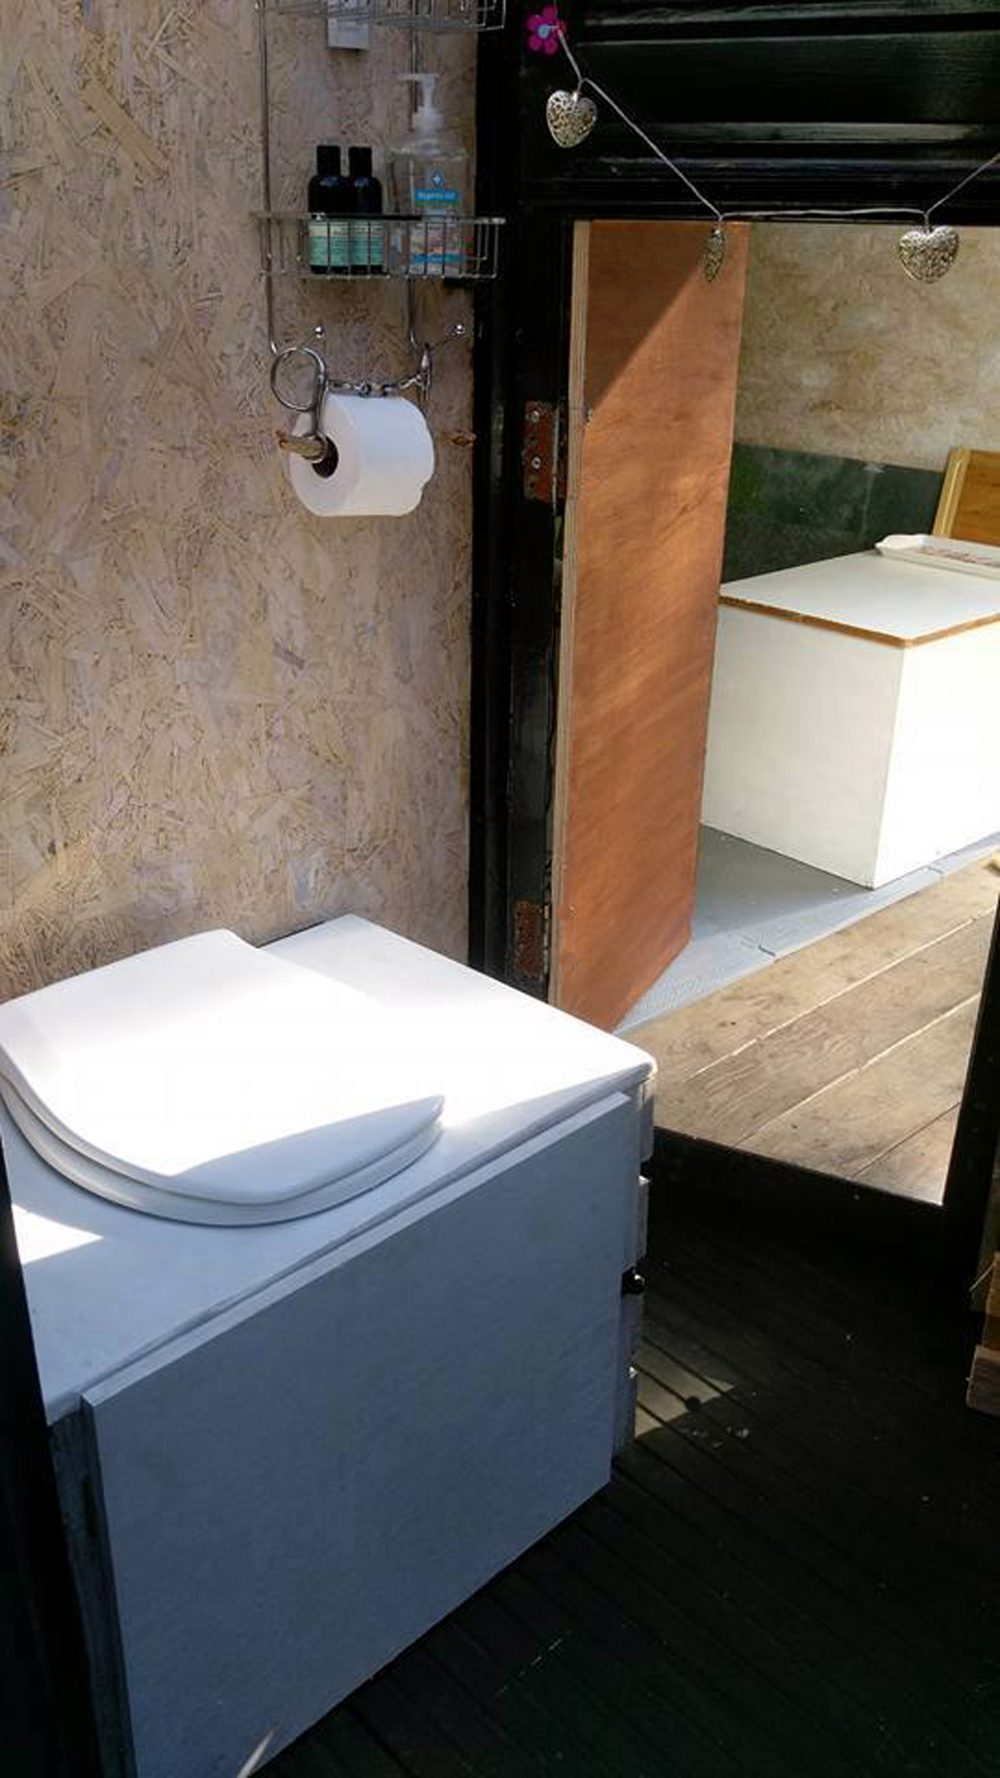 THE UK'S first "glamping horsebox" is for rent on Airbnb for just £30 a night. Constructed using a vintage horsebox, wooden pallets and corrugated iron, the the  home-from-home boasts its own "composting toilet" comeplete with "full instructions". The "Prancing Pony Wild Glamping Pod", in Bonar Bridge, an hour north of Inverness, also has a built in shower and kitchen sink. Guests can also enjoy the "garden" - four acres of stunning Caledonian Pine forest - and little details such as the loo roll holder made from a horse's bit. Owner Stacie MacDonald says on the website "you'll love it if you're more Girl Grylls than high heels" and if you're a guy looking to be a "Wild Man of the Woods". Holidaymakers seeking the "off grid" retreat will have the full experience, according to the description, with drinking water in a portable tank and a shower that is heated using solar panels with a rain capture system. Capable of accommodating two people, with a fold out futon bed, the toilet is accessible from the outside and also through a "tiny" door for inside the trailer.